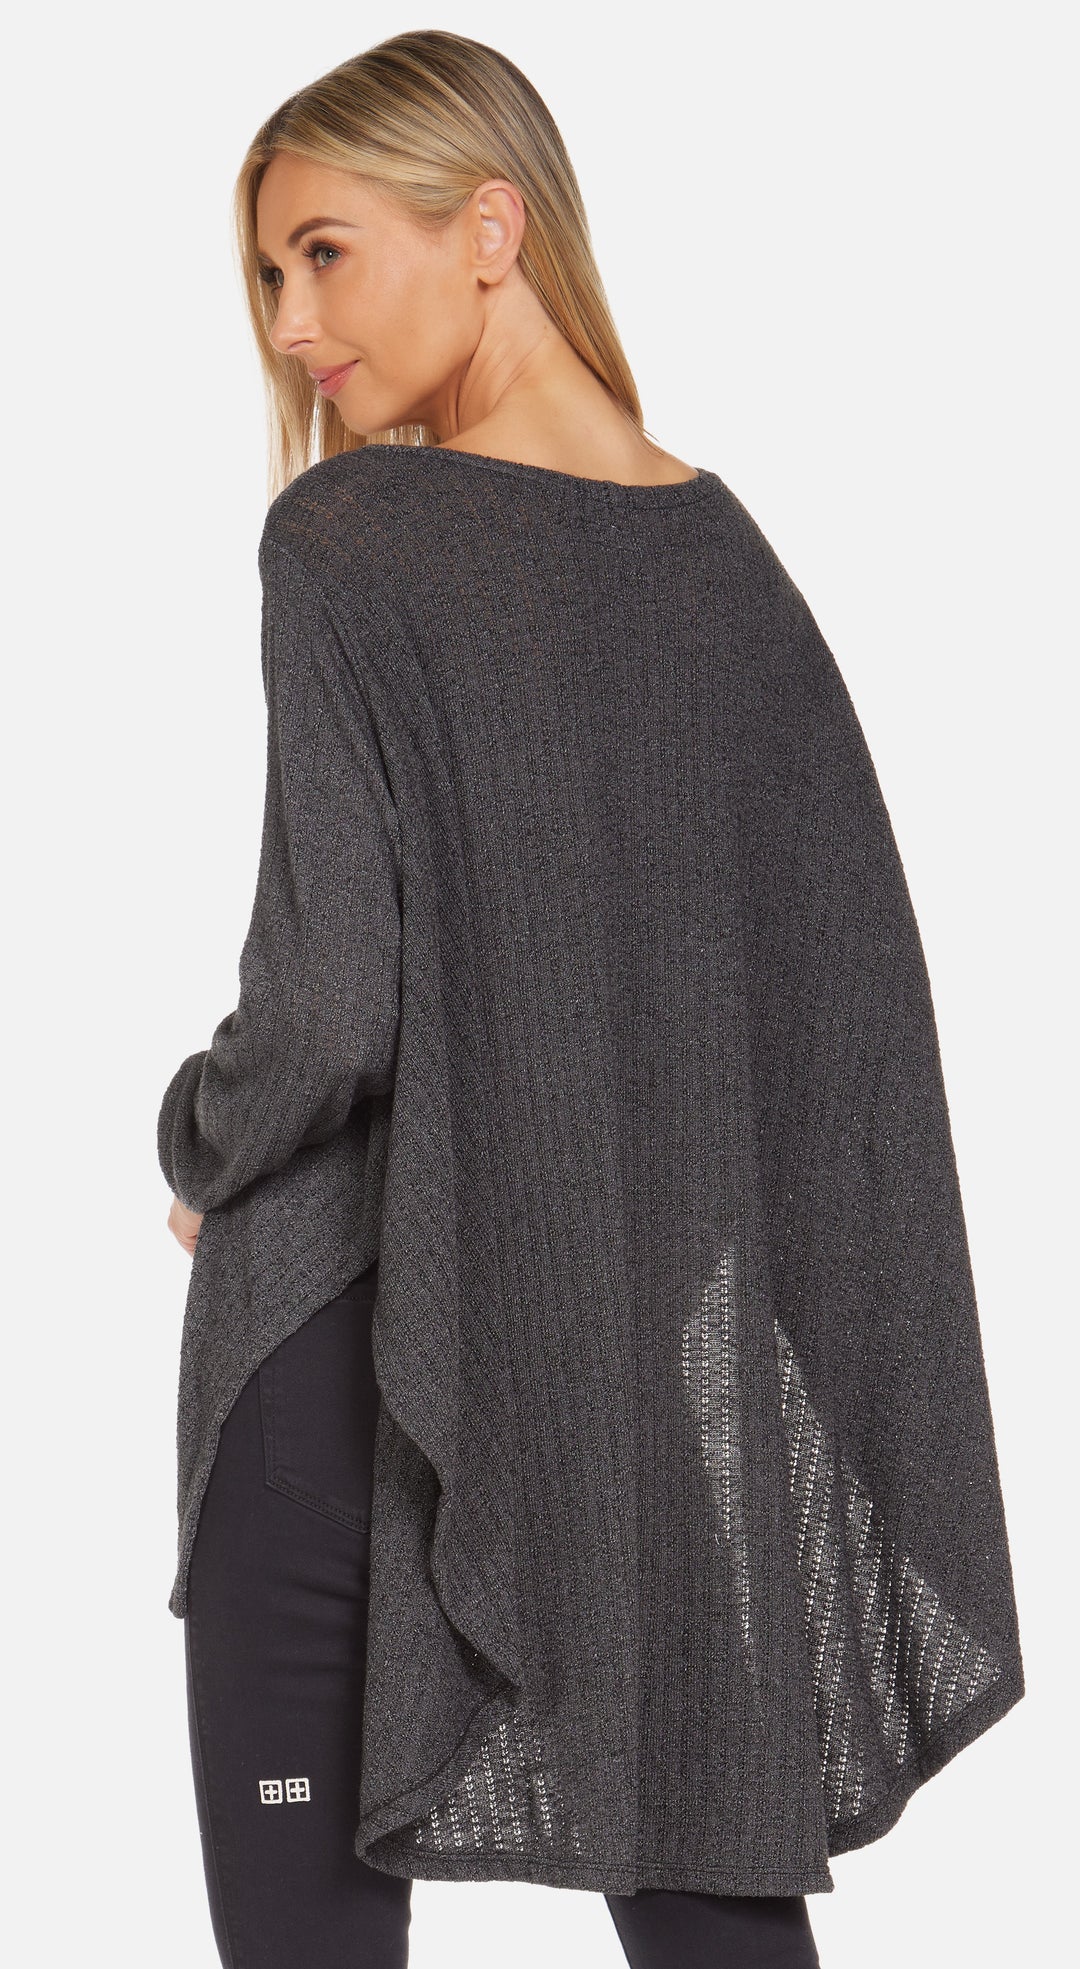 CHARCOAL FITZGERALD L/S FLOWY TOP - Kingfisher Road - Online Boutique